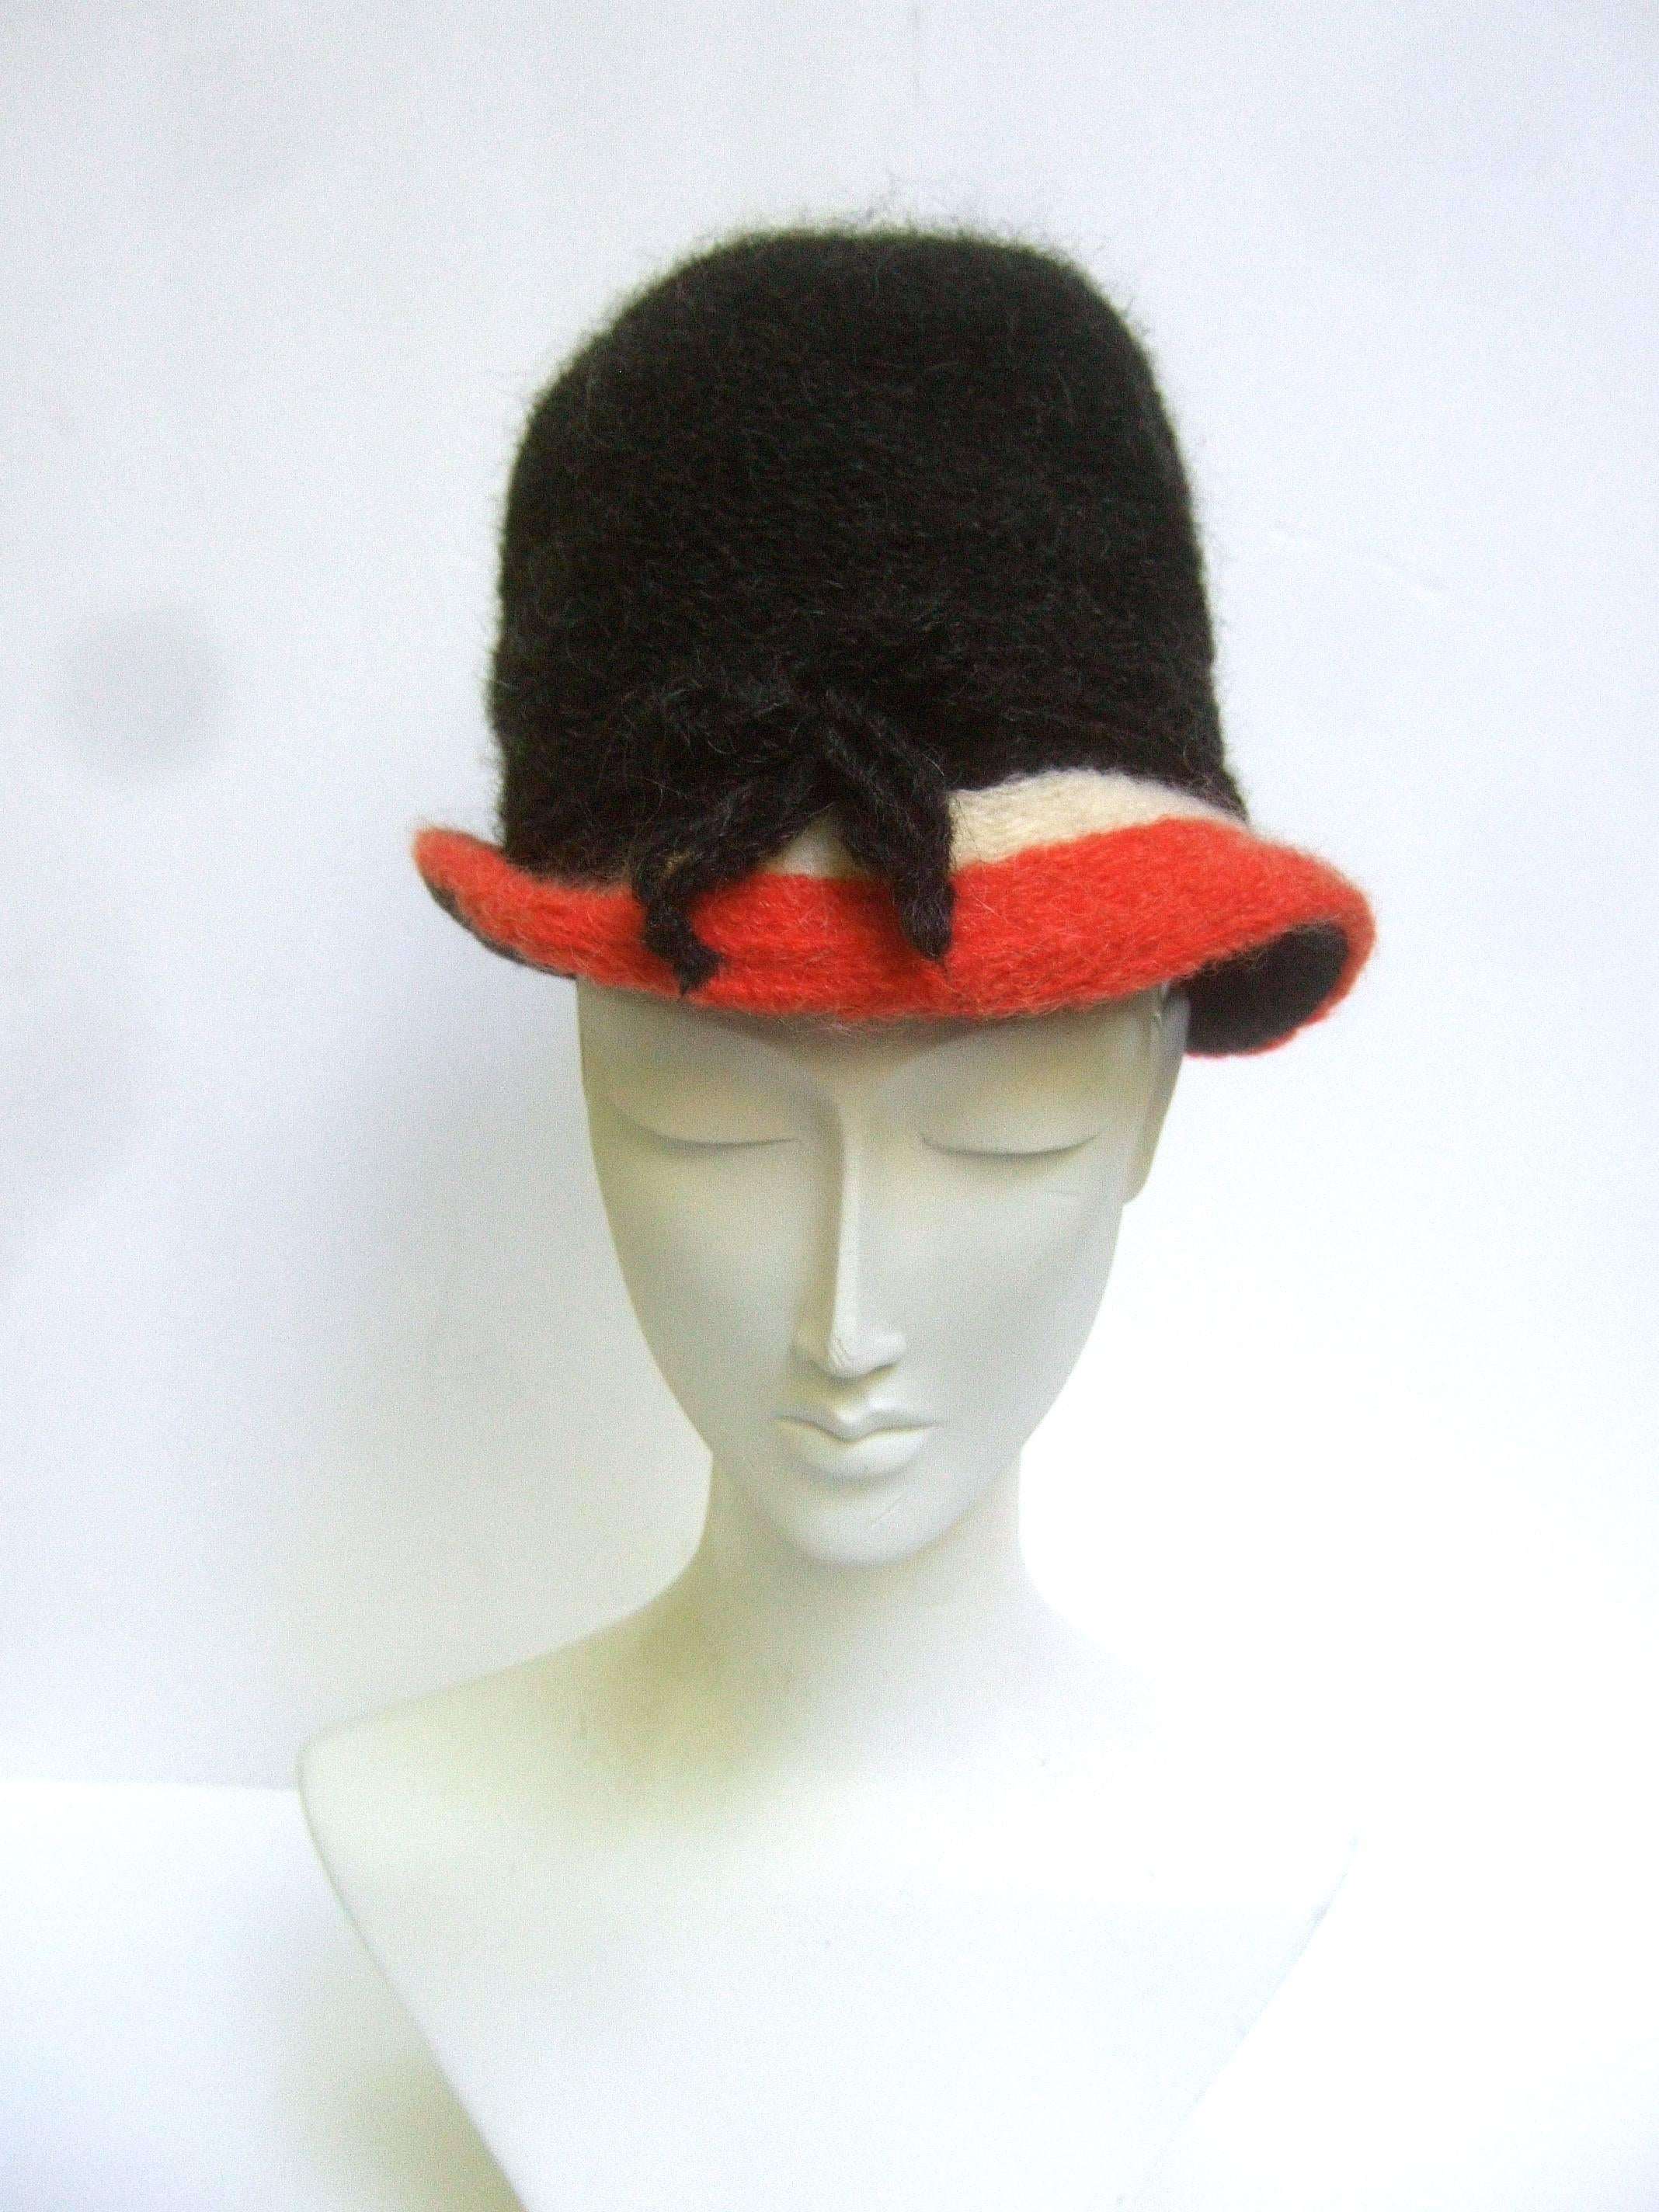 Yves Saint Laurent Stylish Wool Knit Hat c 1970 In Good Condition For Sale In University City, MO